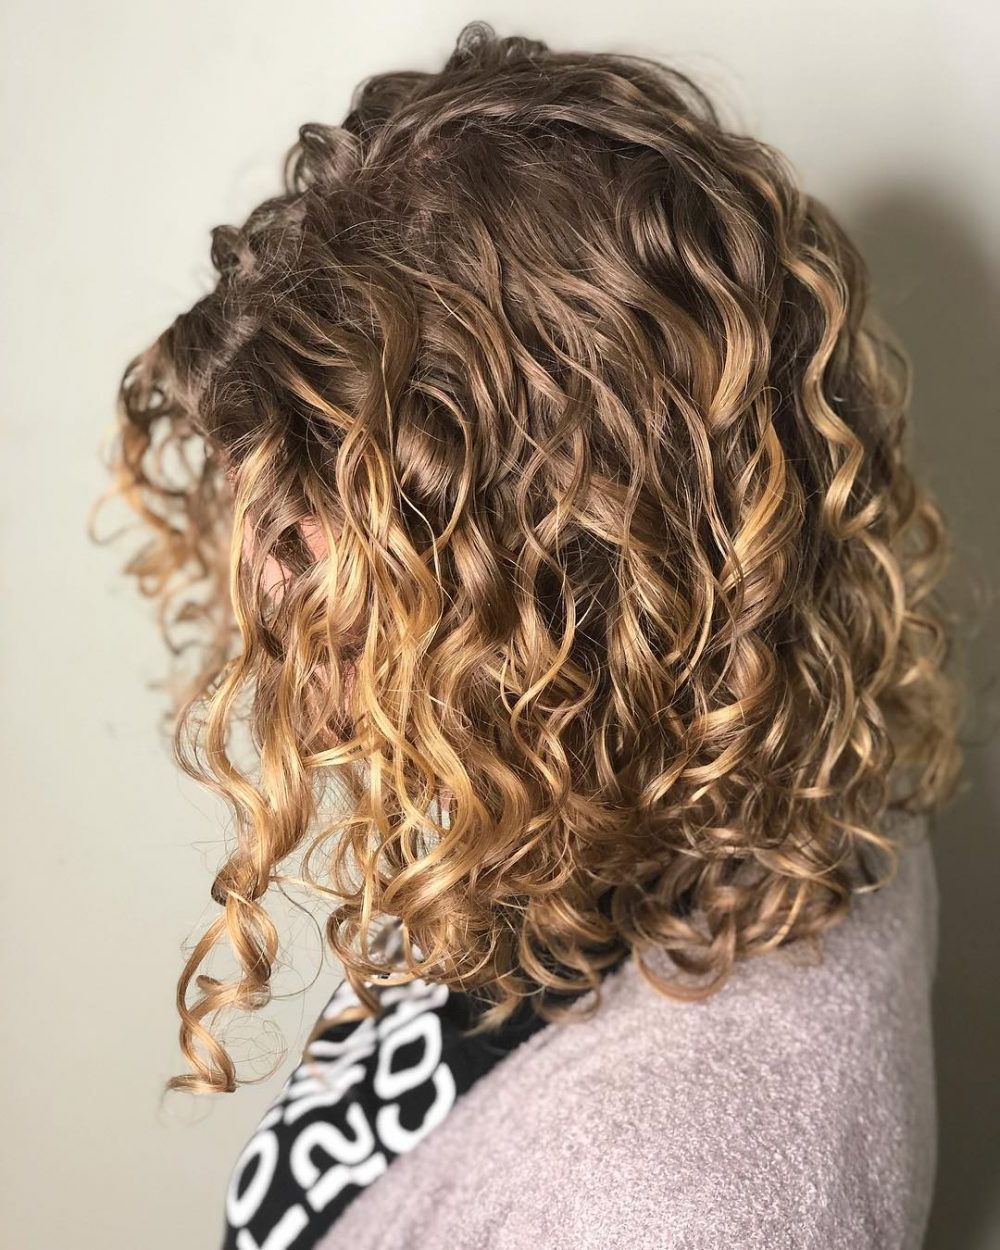 30 Gorgeous Medium Length Curly Hairstyles For Women In 2018 Within Casual Scrunched Hairstyles For Short Curly Hair (View 7 of 25)